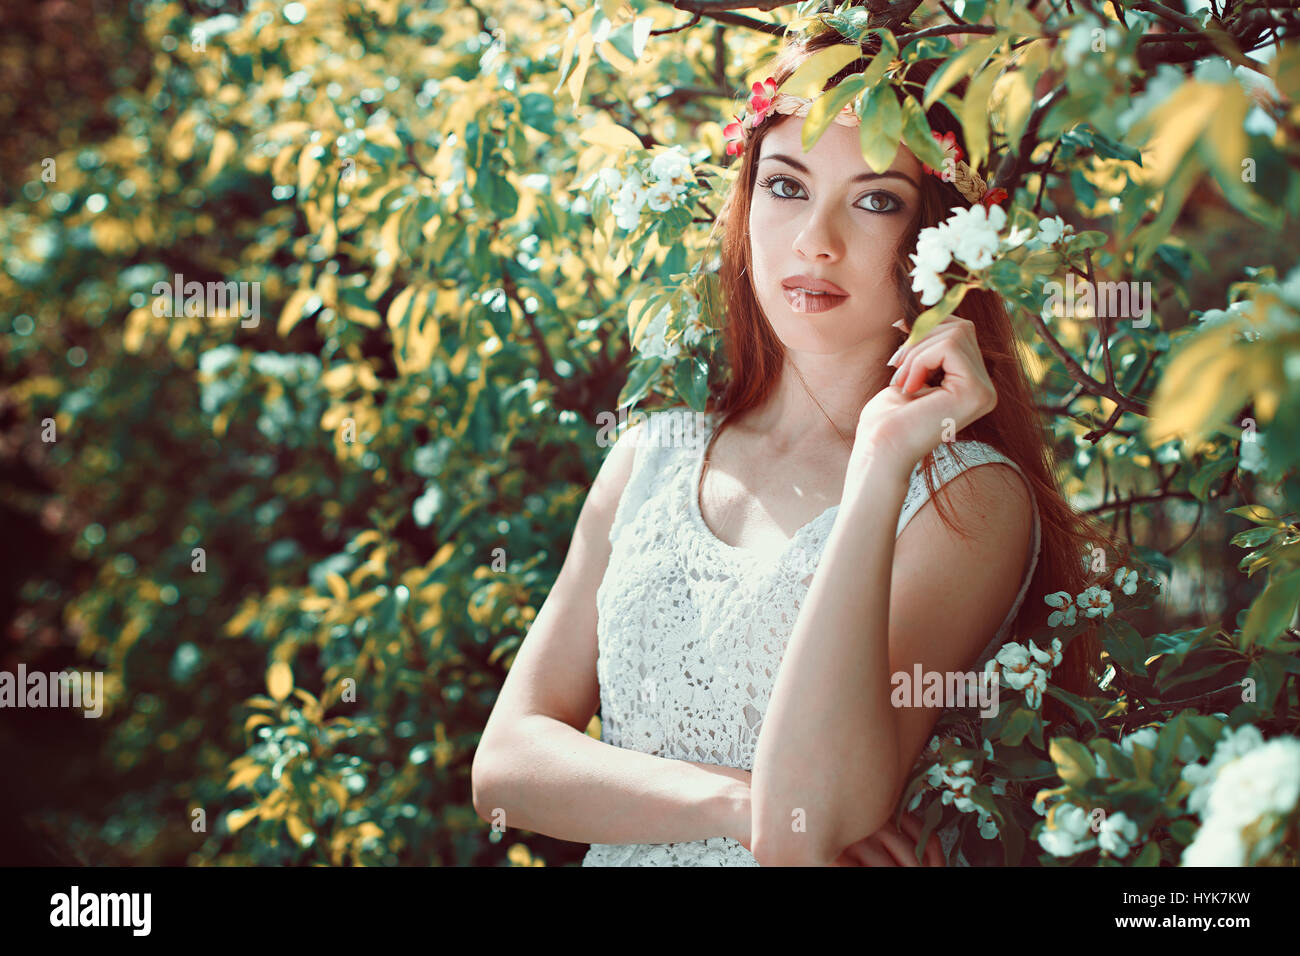 Spring flowers portrait of beautiful young woman Stock Photo